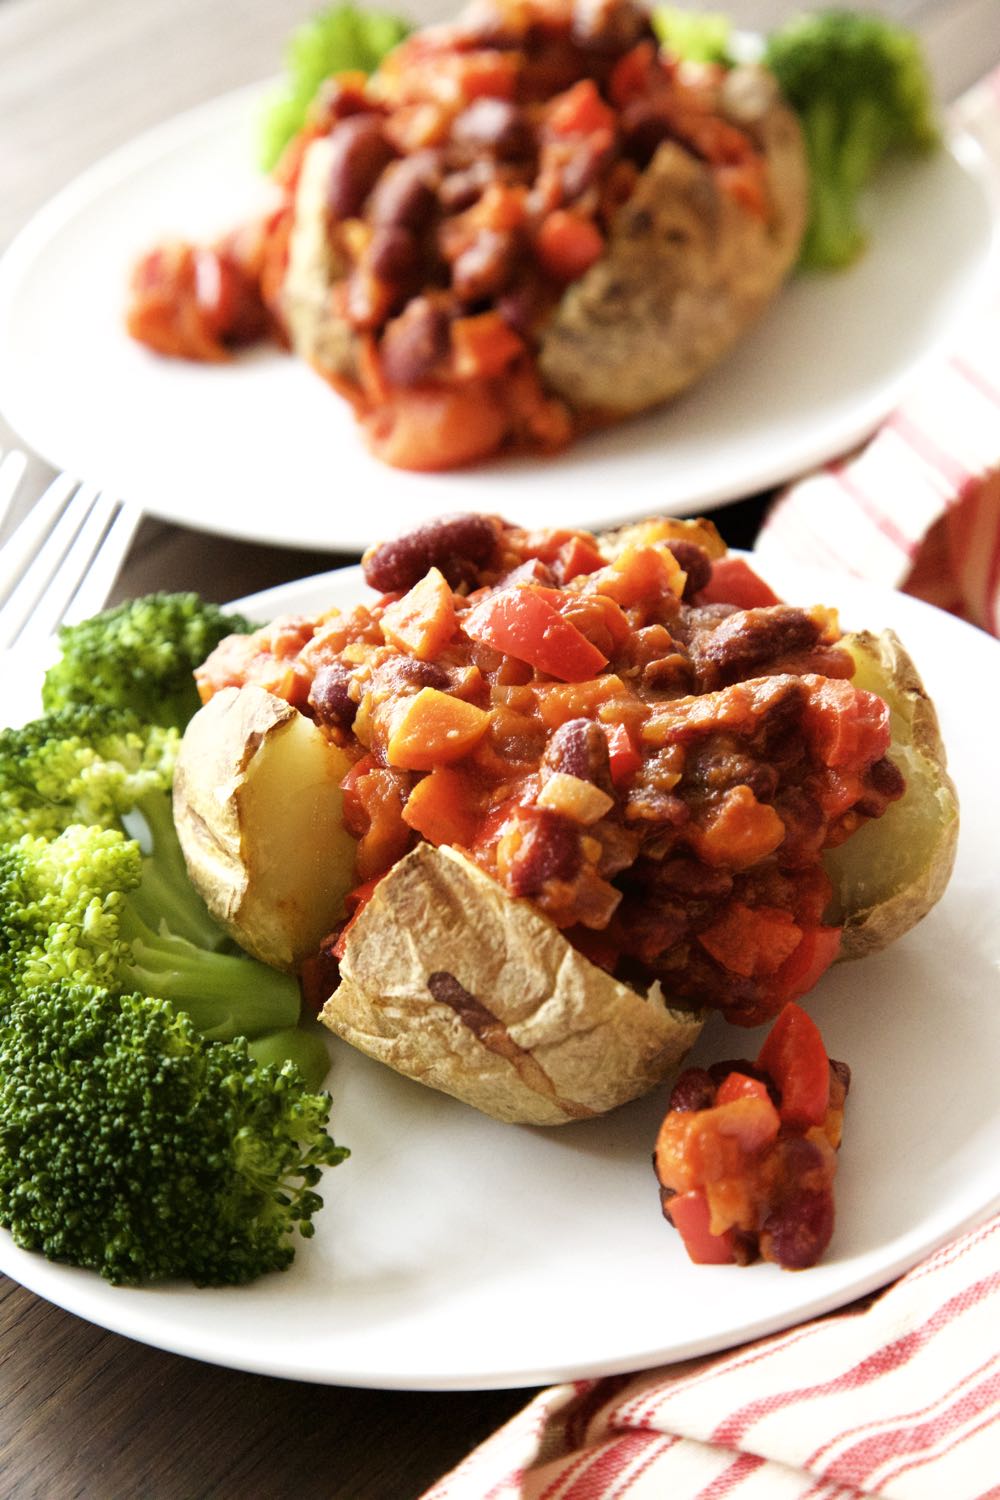 A baked potato is split open and filled with vegan vegetable chilli. It is on a white plate with steamed broccoli. There is another plate of the same, blurred, in the background